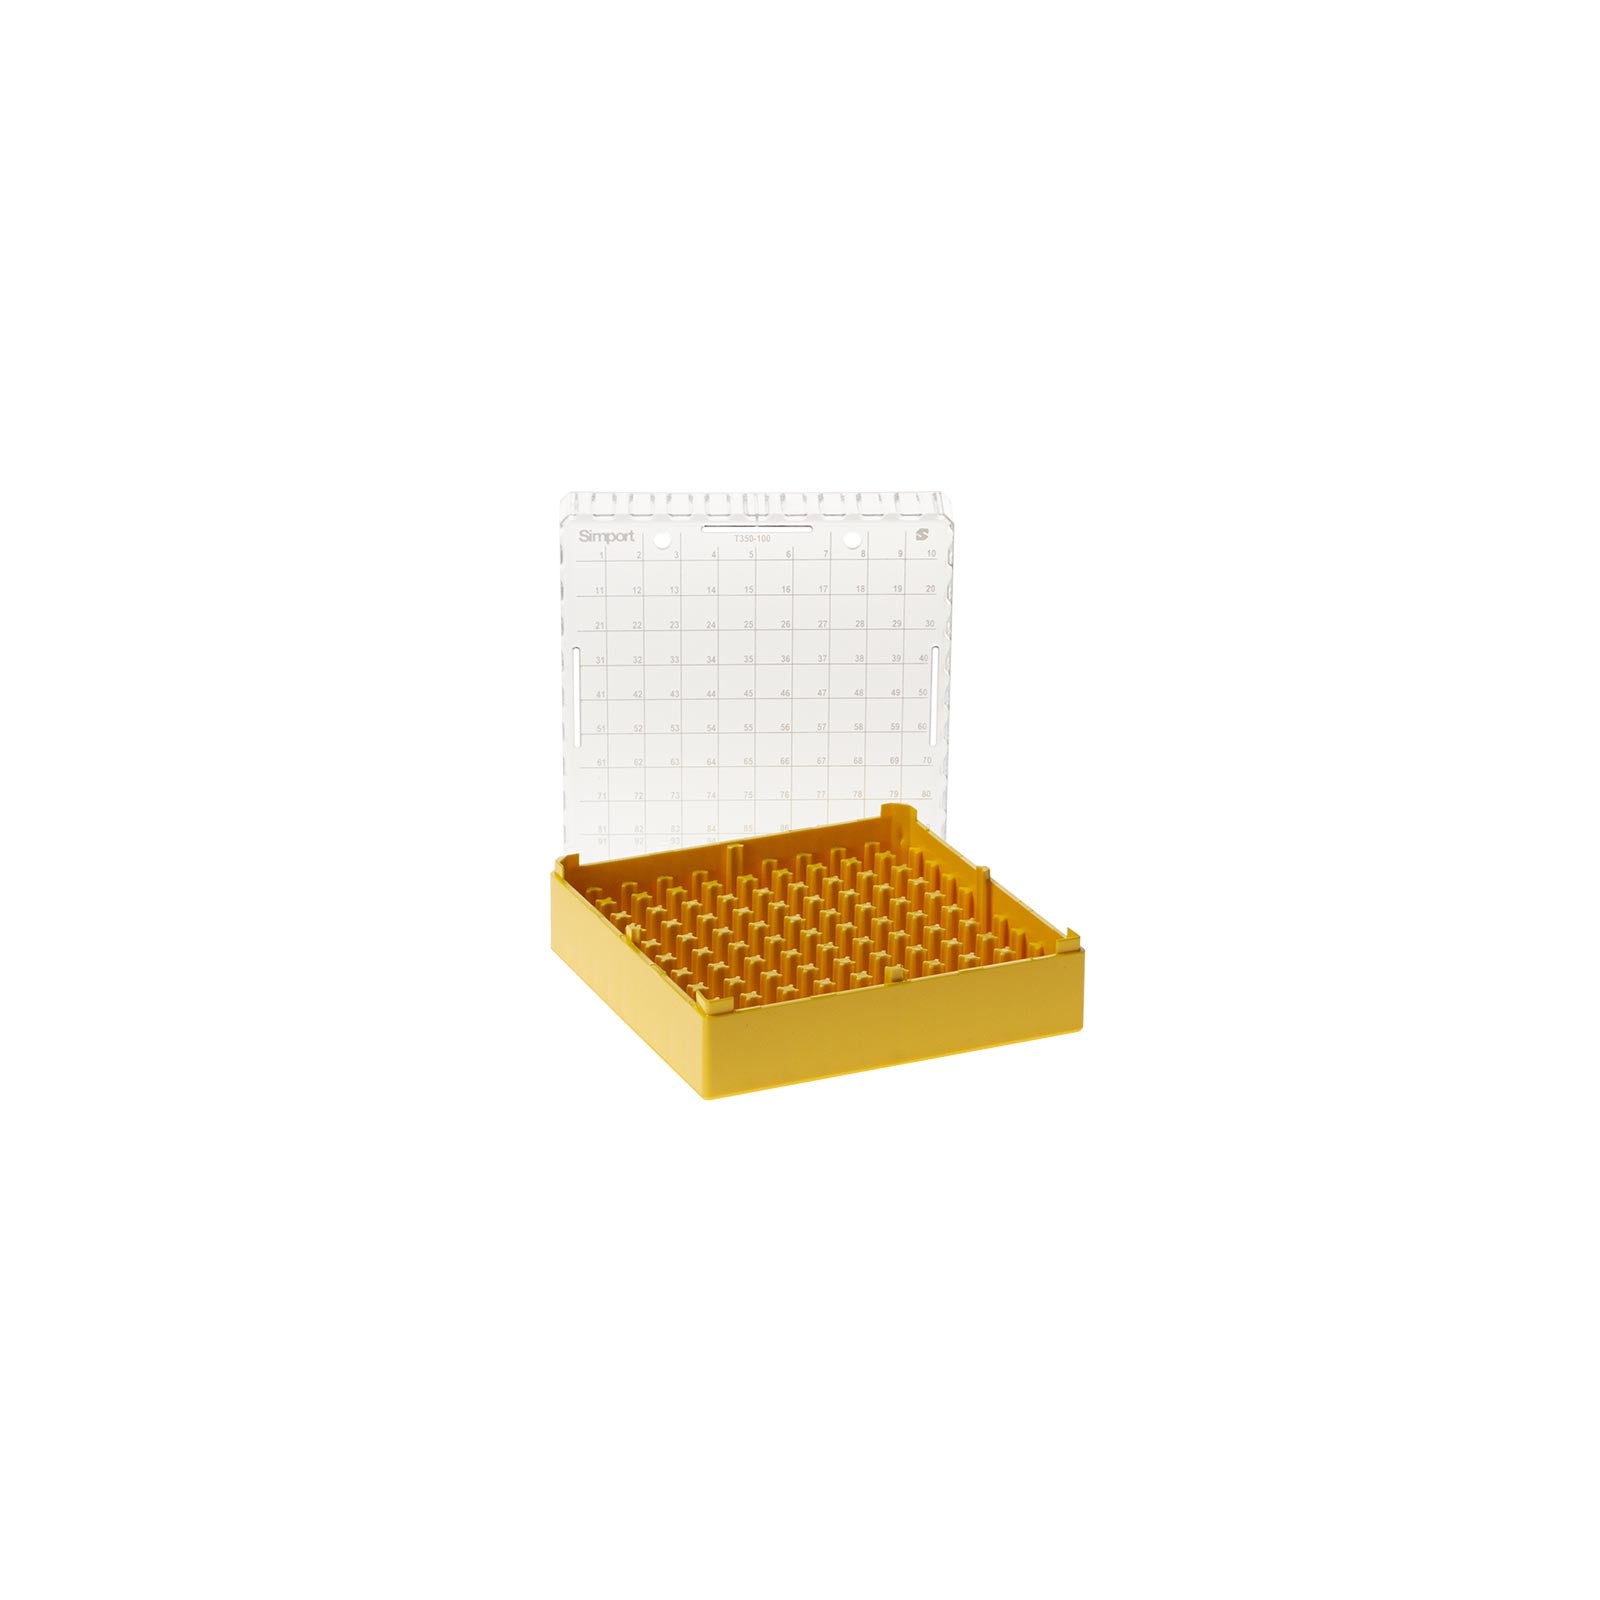 T350-100x Microtube Storage Box 0.5 to 2.0ml, 100 Positions